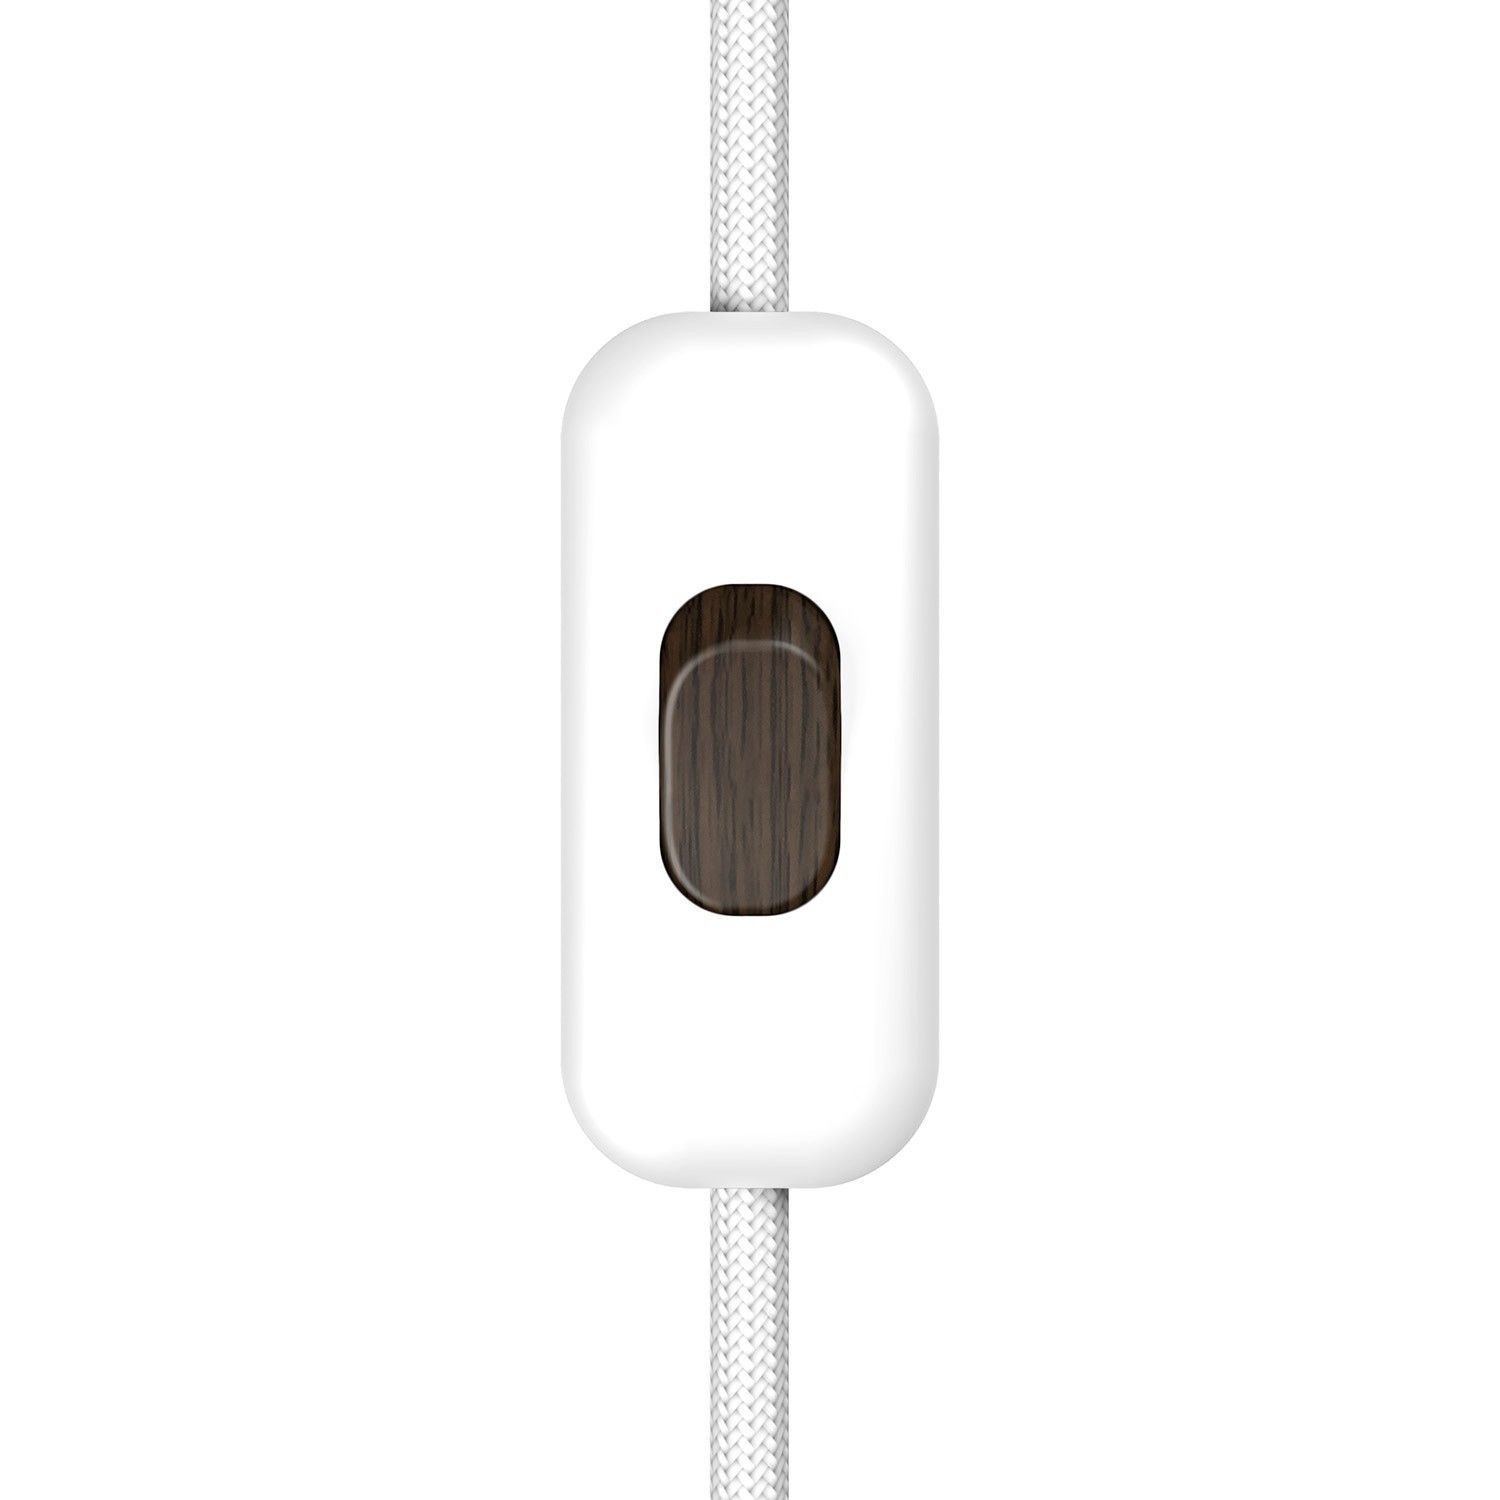 Inline single-pole switch Creative Switch White with earth terminal